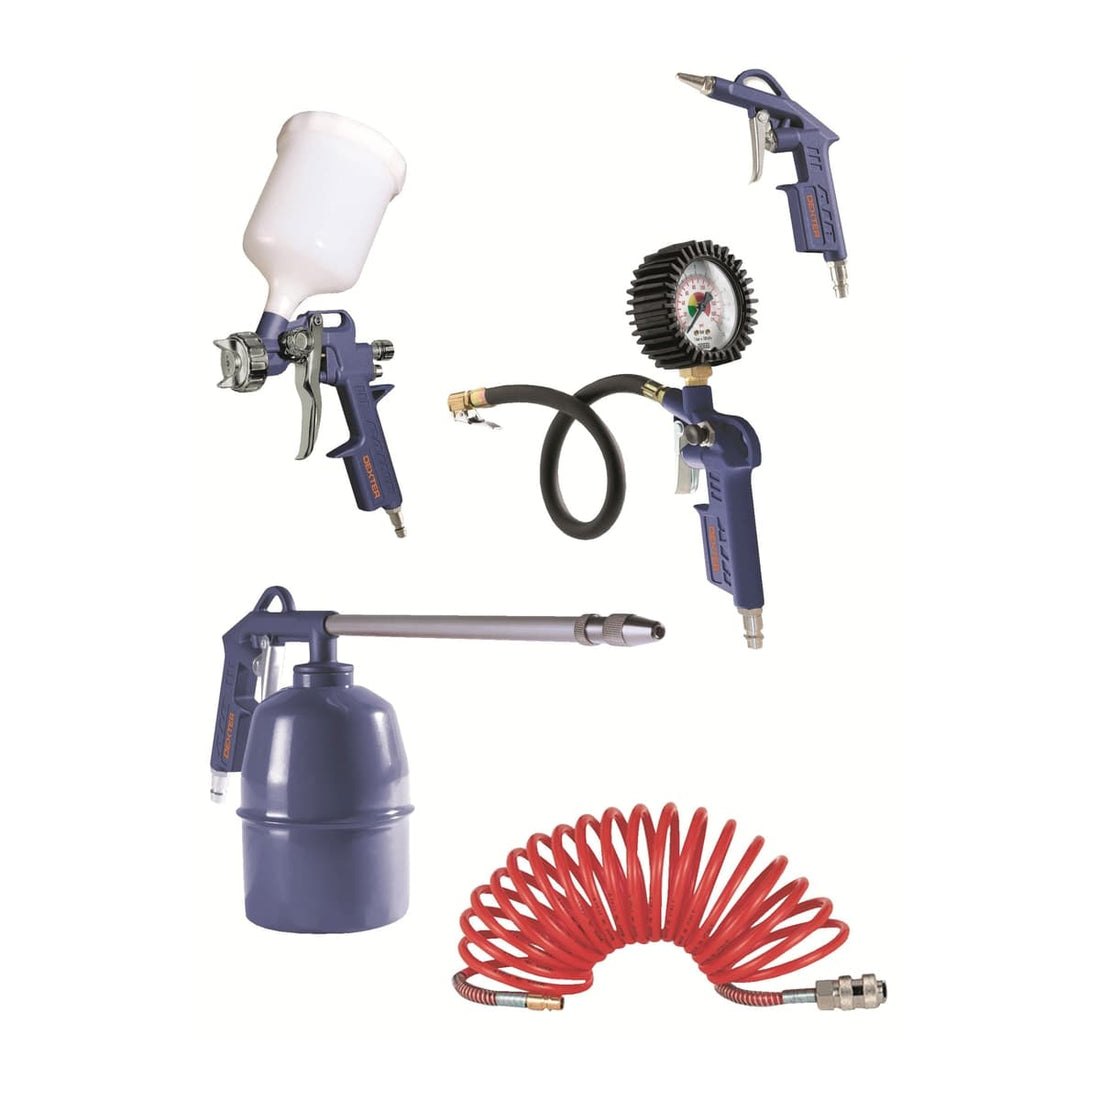 5 PC KIT OF ACCESSORIES FOR DEXTER COMPRESSOR - best price from Maltashopper.com BR400000509